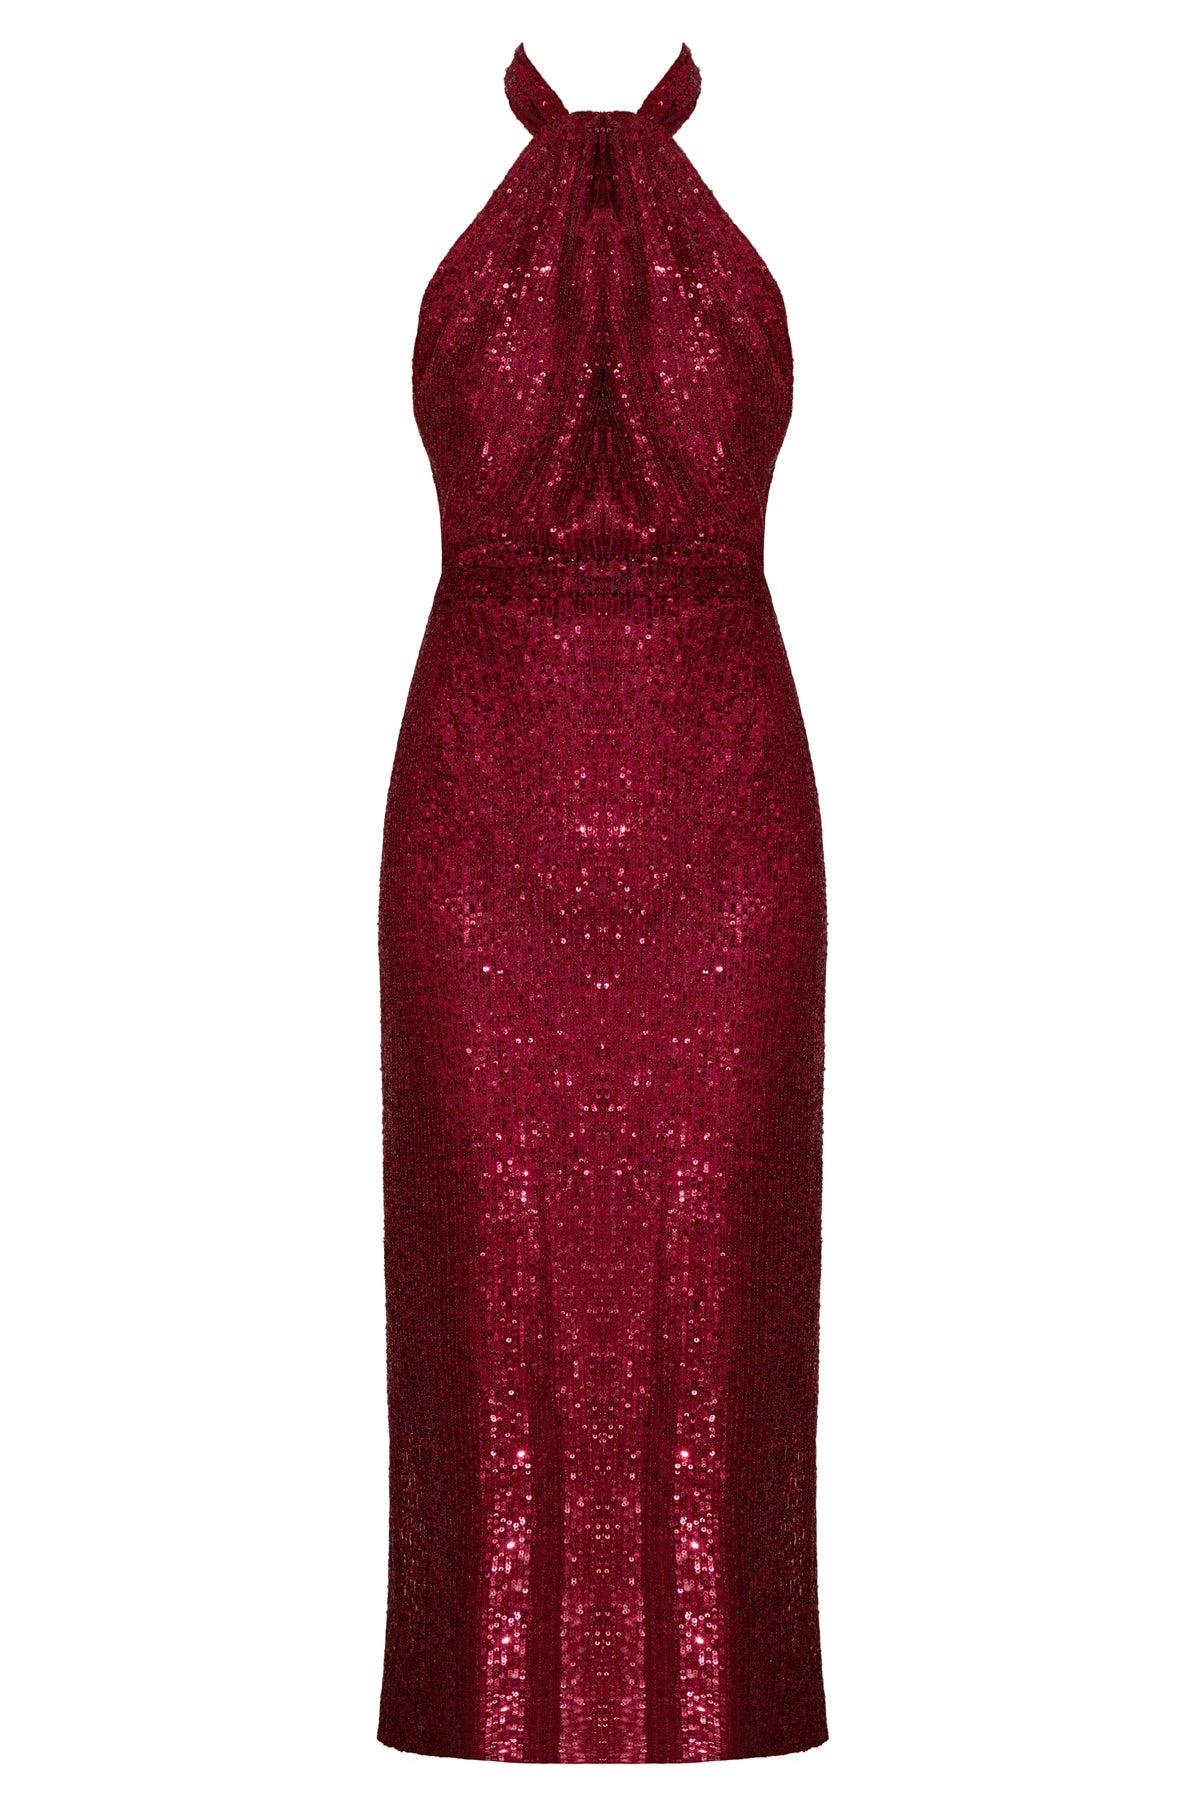 ELIN red sequin midi cocktail dress